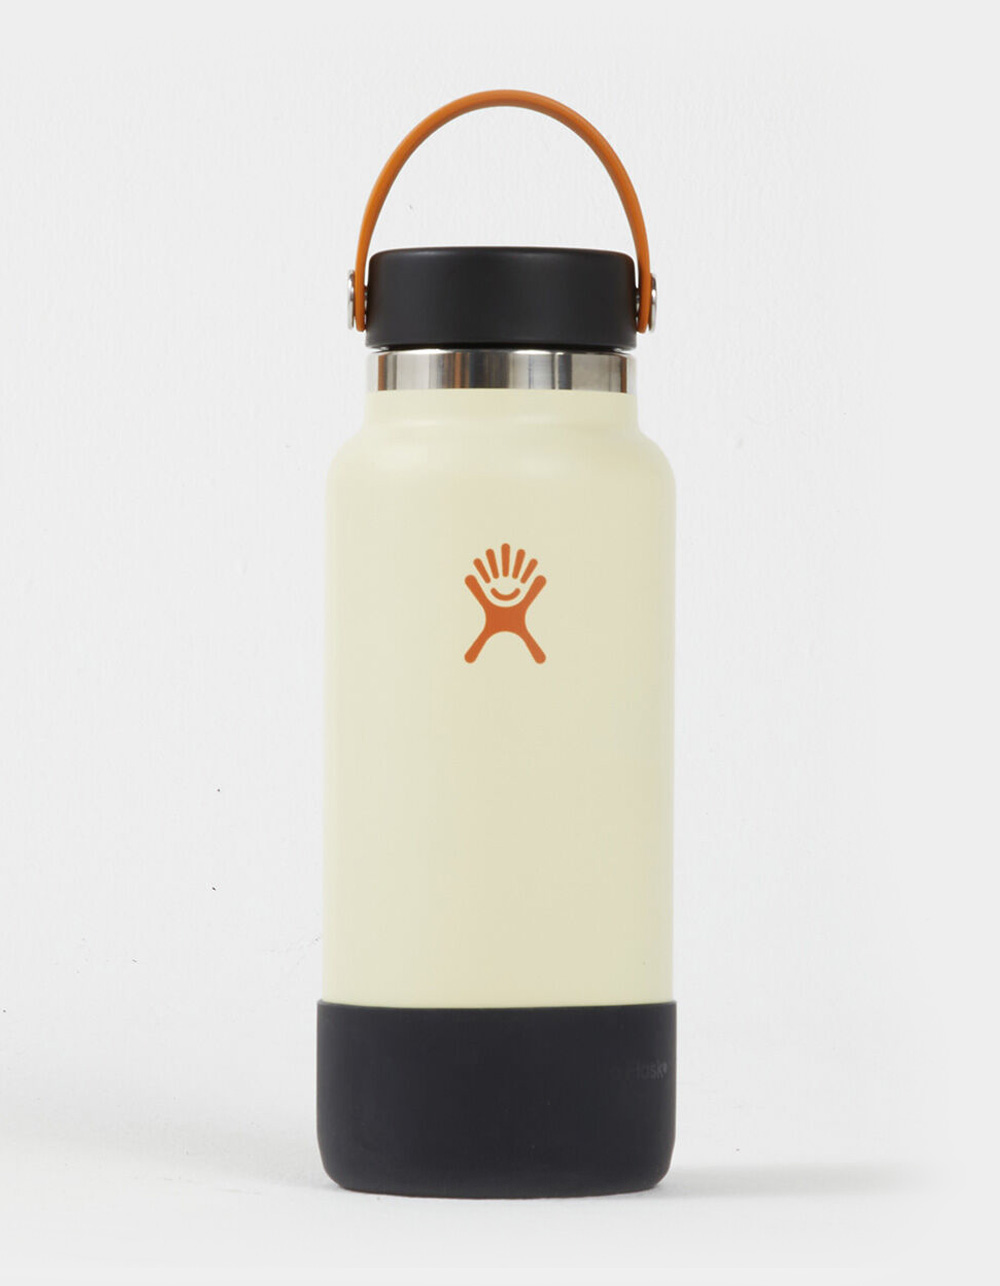 Real boot and bottle? From US  : r/Hydroflask